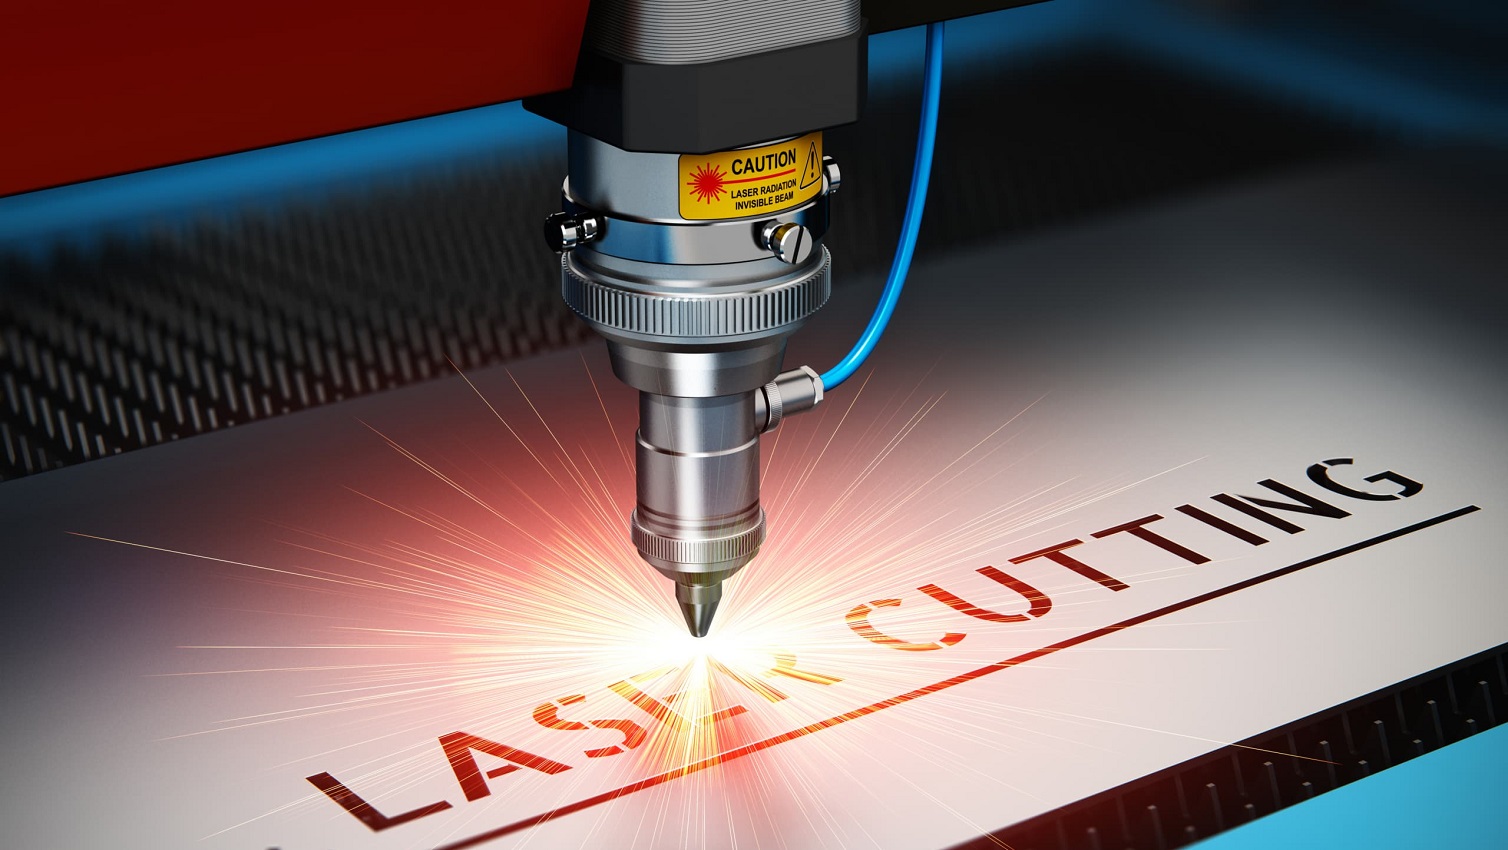 Parameters which influence the laser cutting process